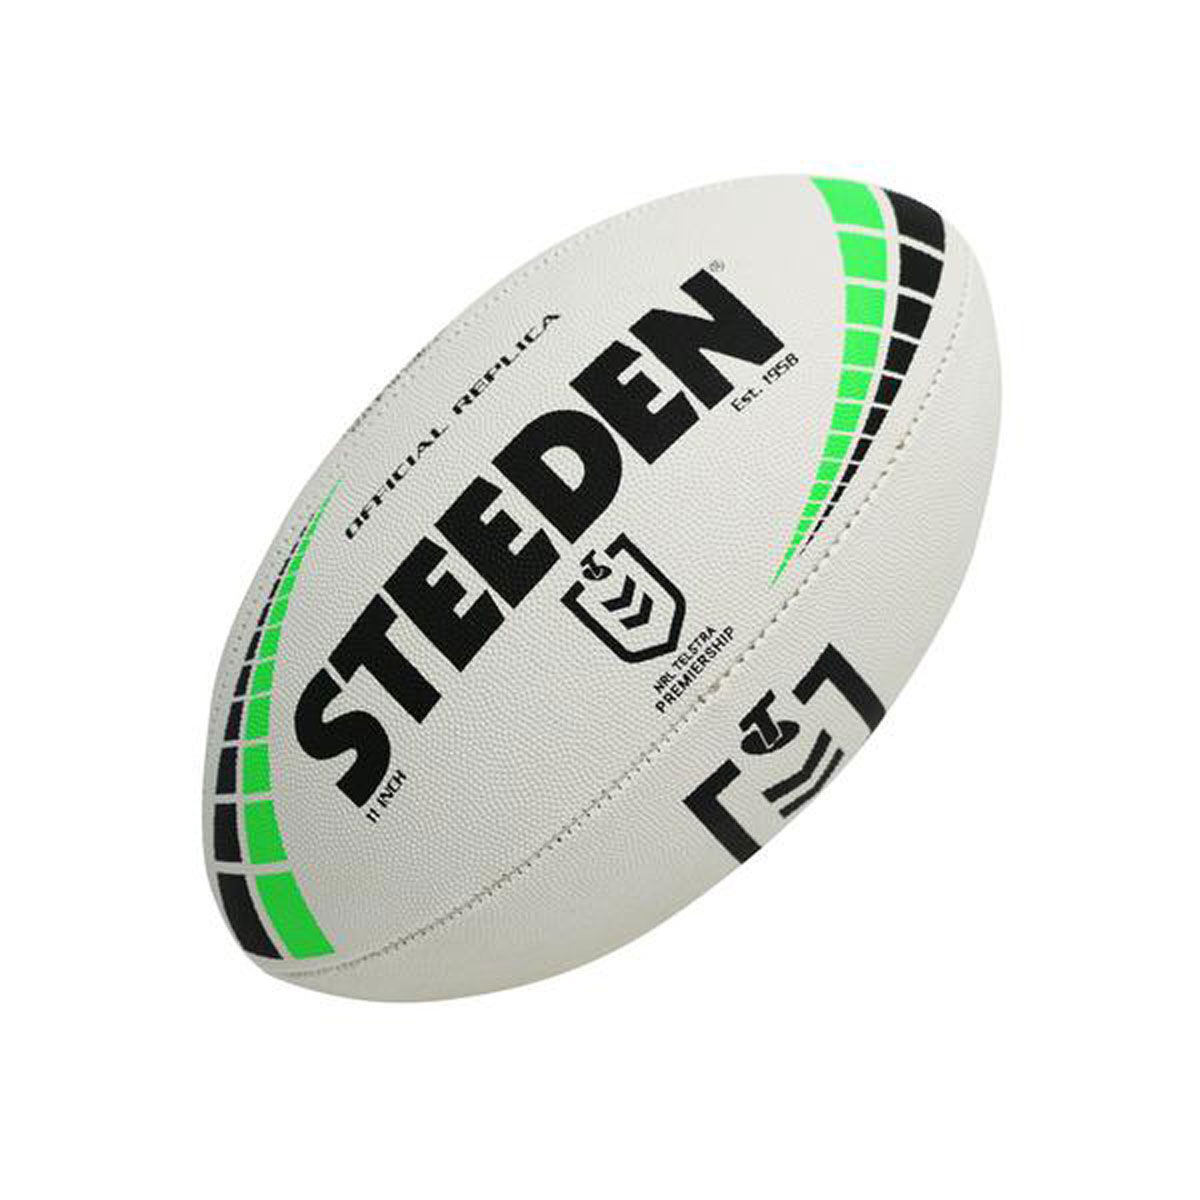 Wests Tigers 2021 NRL Size 5 Team Replica Ball 